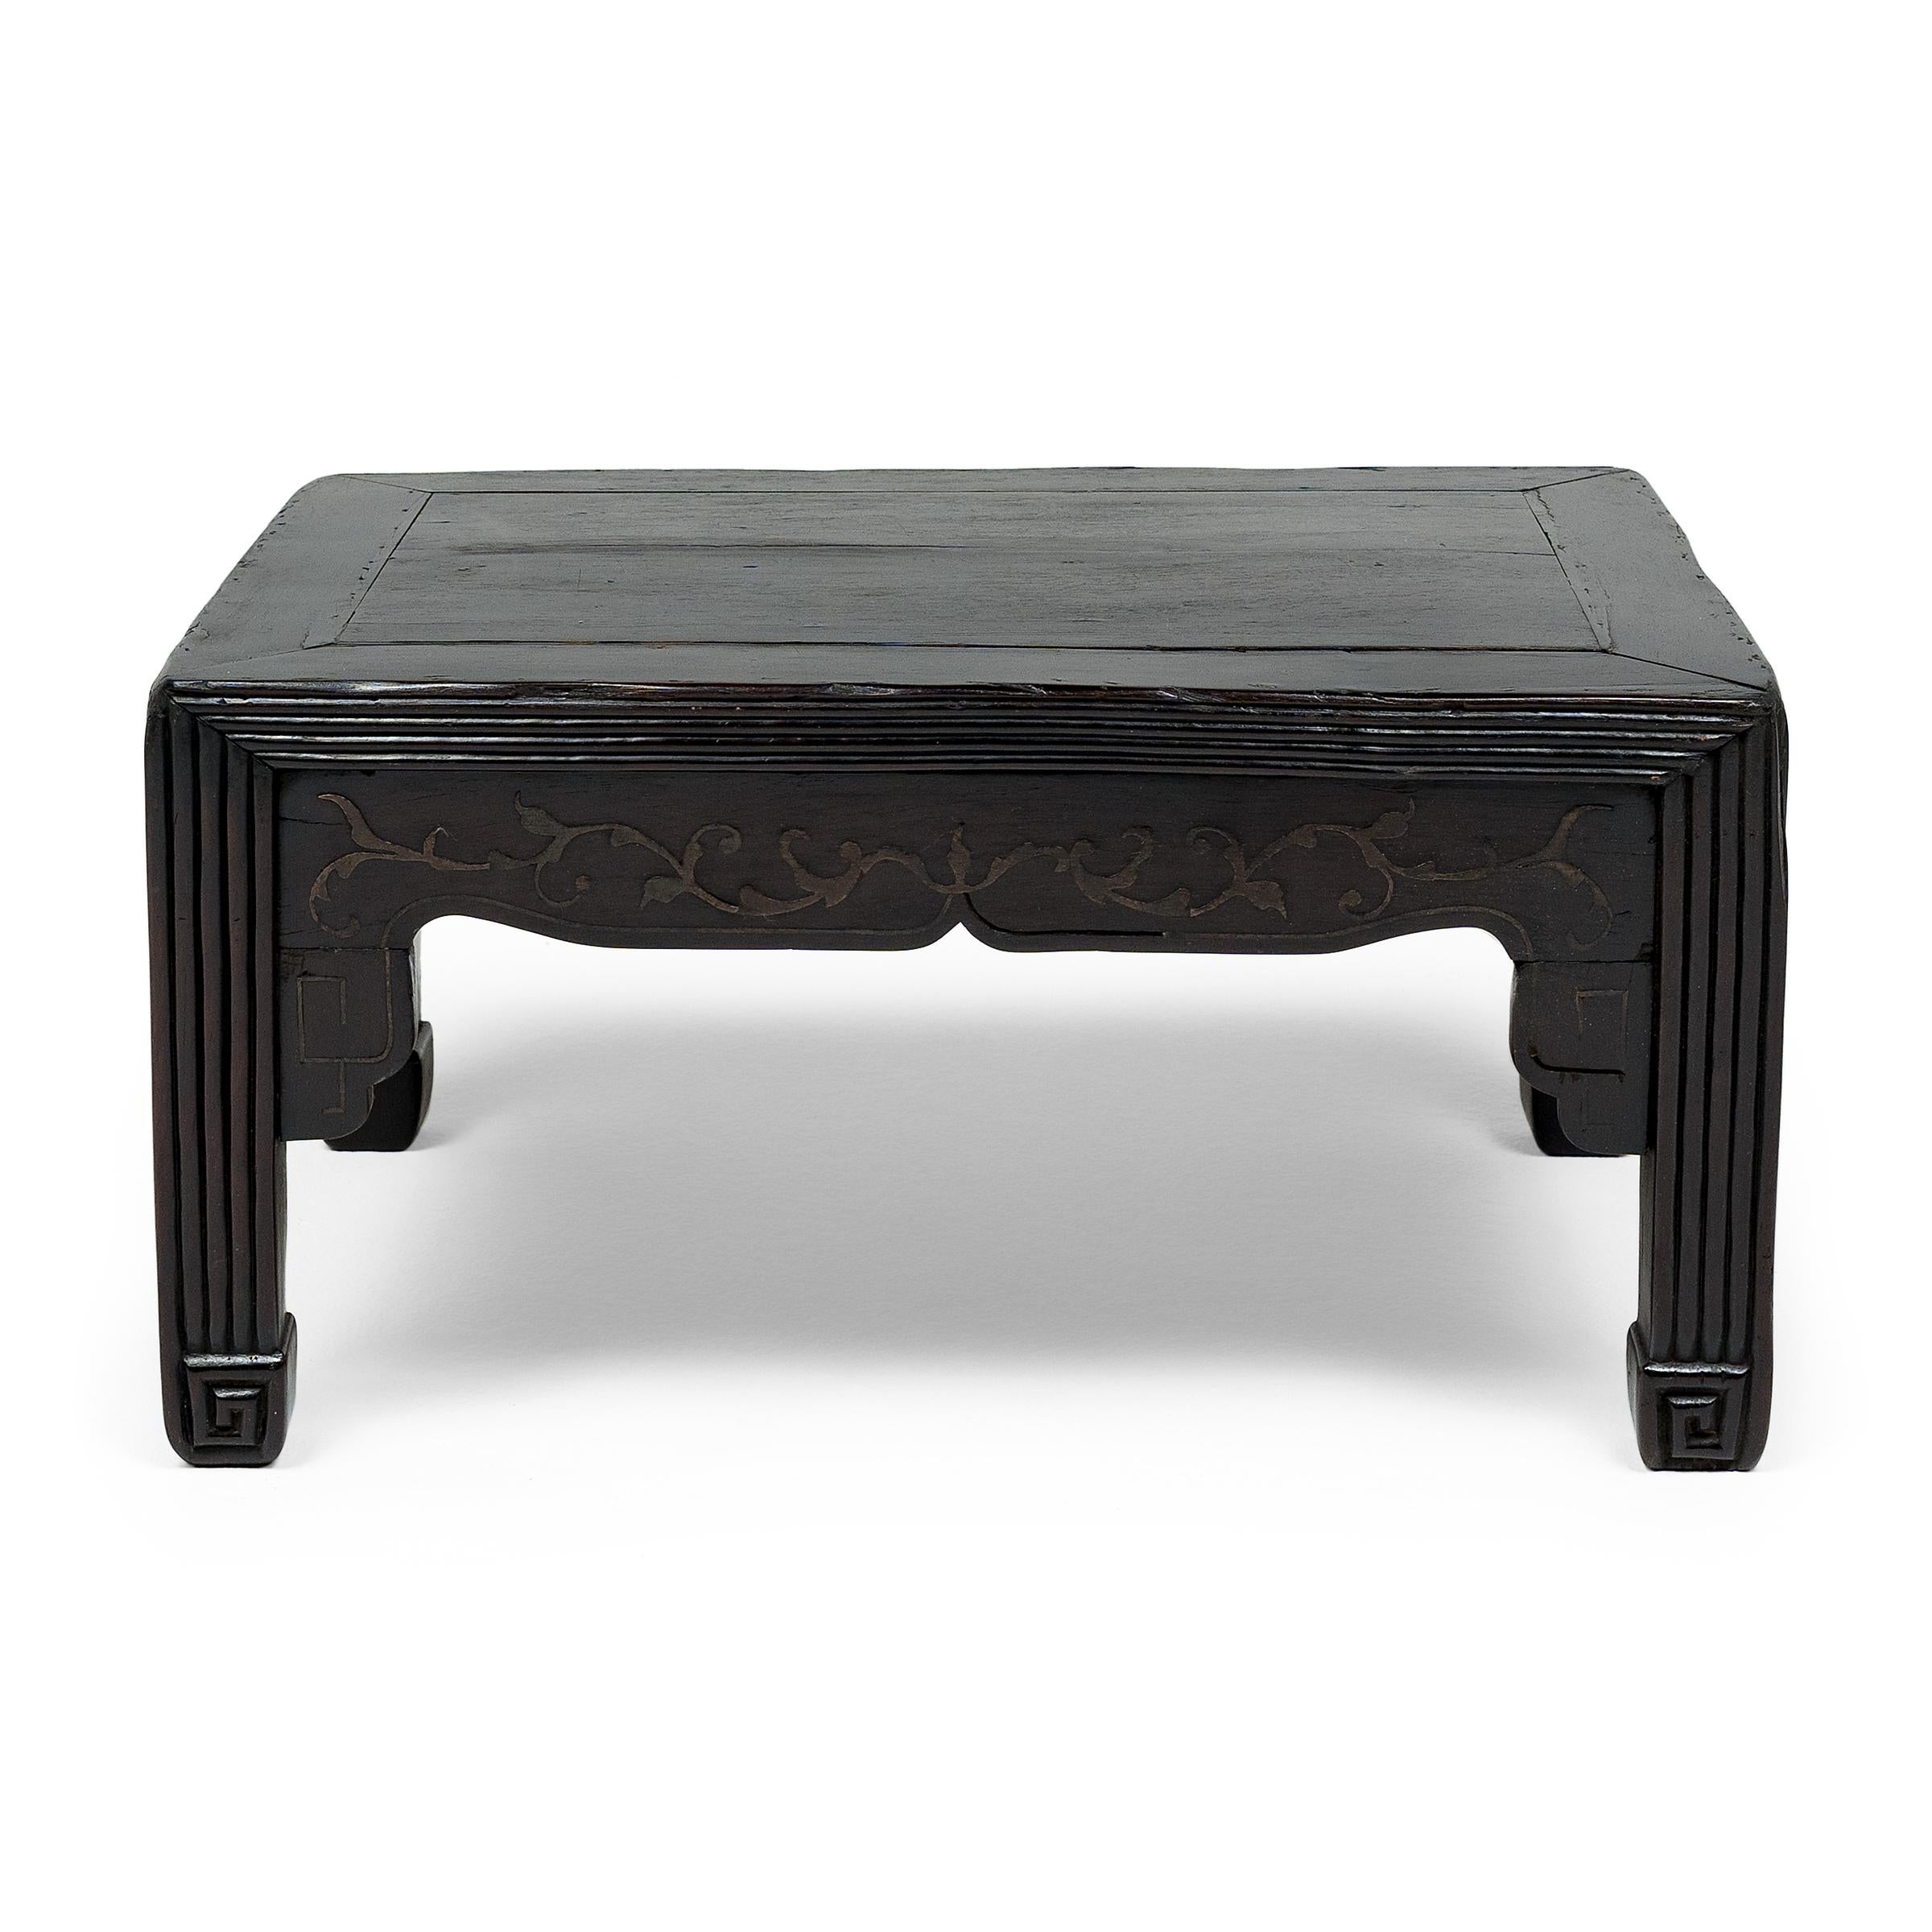 This 19th-century hardwood kang table was traditionally used as a convenient working surface for painting, writing, sewing, or eating atop a heated kang platform. The petite table features a rectangular floating-panel top, straight legs and a simple